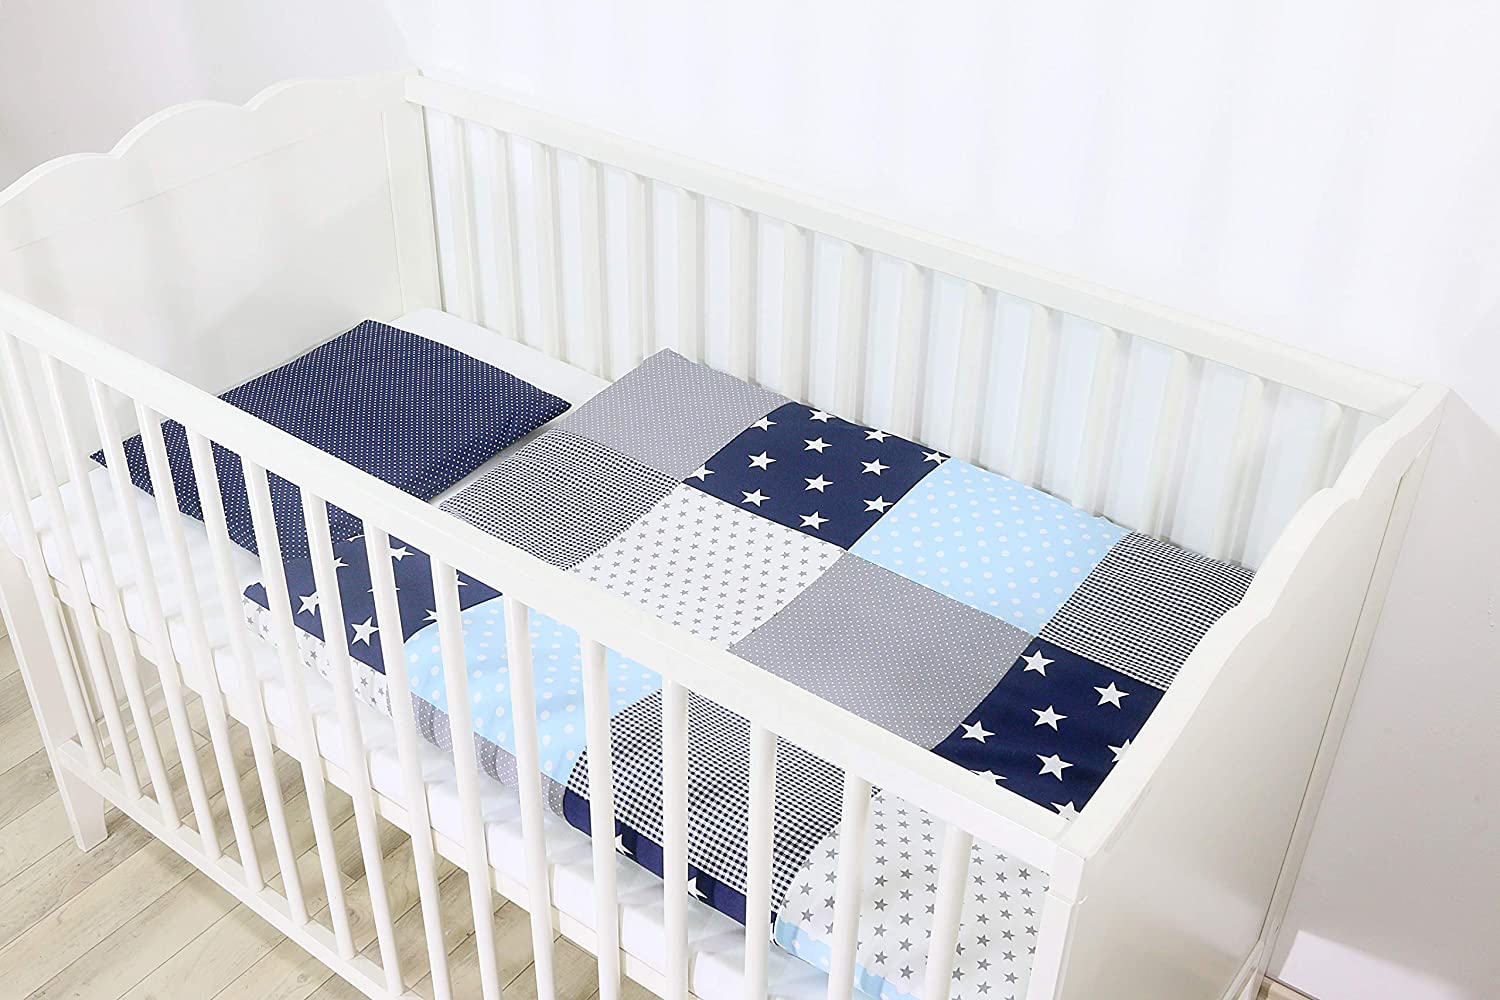 Ullenboom ® Baby Bedding Set - 2 Pieces (Complete): Baby bed linen 80 x 80 cm and pillowcase 35 x 40 cm, baby bed set for the baby bed made from 100% cotton. BLUE LIGHT BLUE GREY